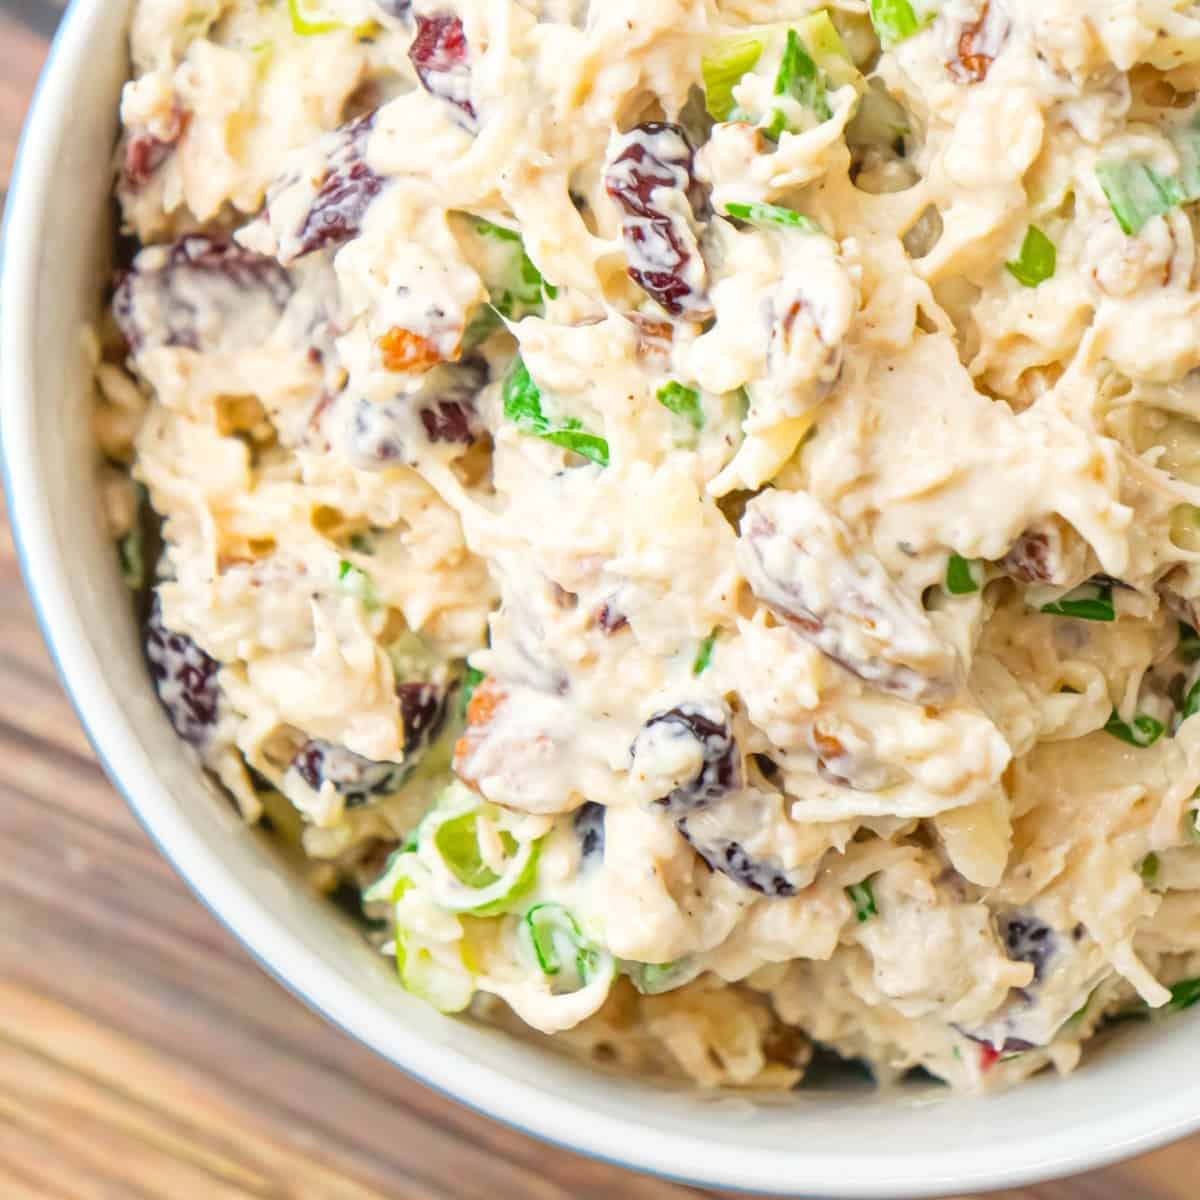 Chicken Salad with Cranberries is an easy cold lunch or dinner recipe using canned chicken and loaded with dried cranberries, chopped green onions, pecan pieces and shredded mozzarella cheese.